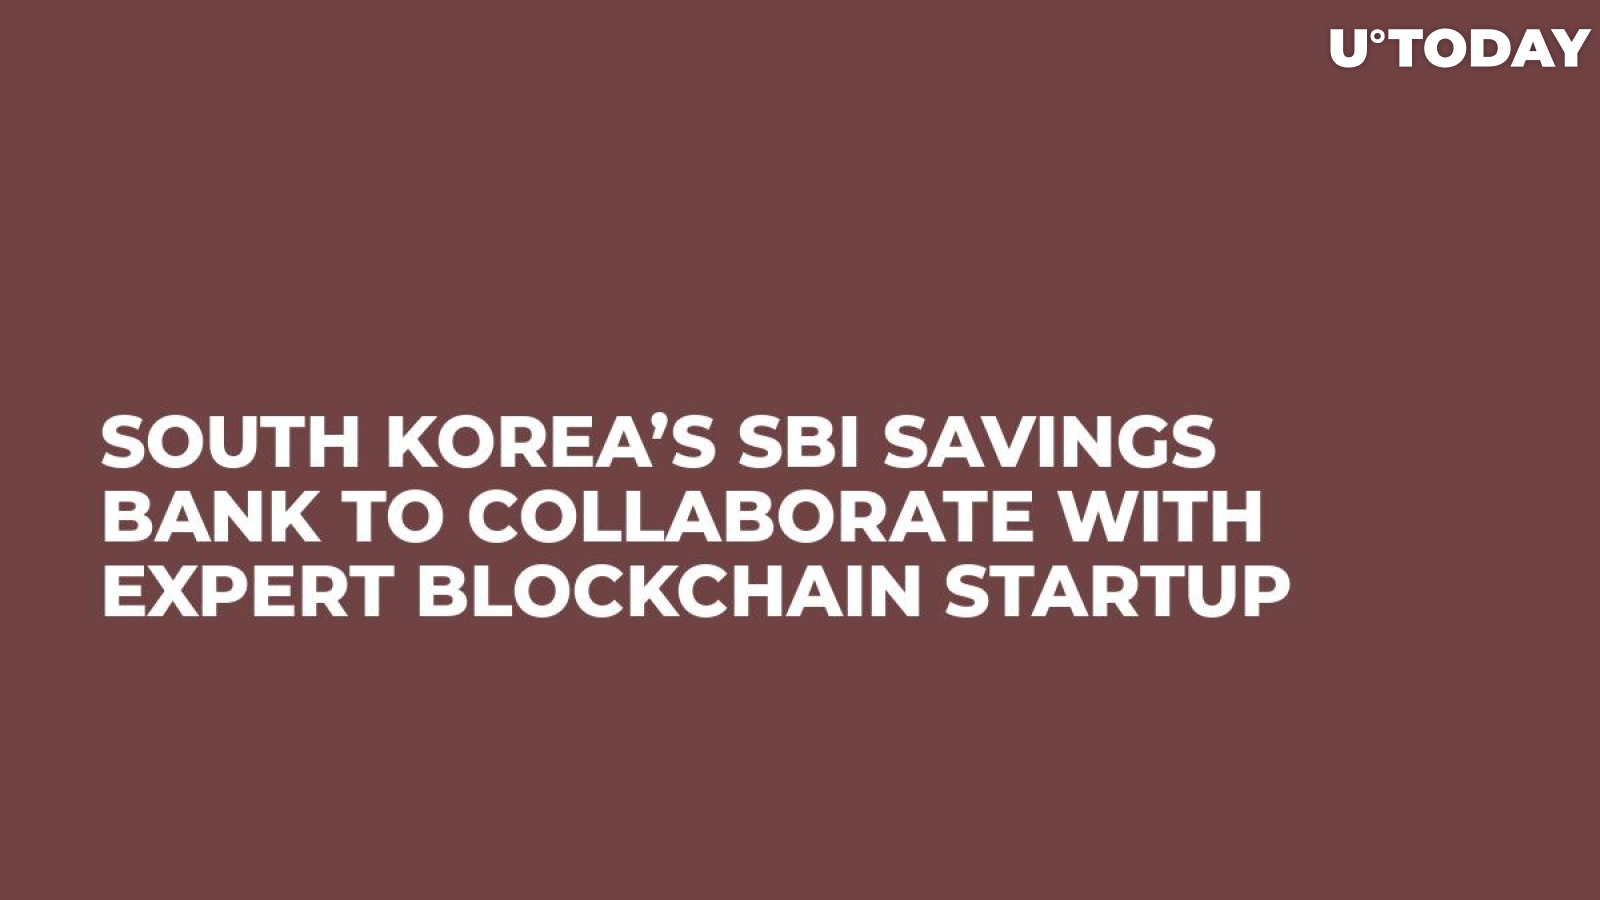 South Korea’s SBI Savings Bank to Collaborate With Expert Blockchain Startup